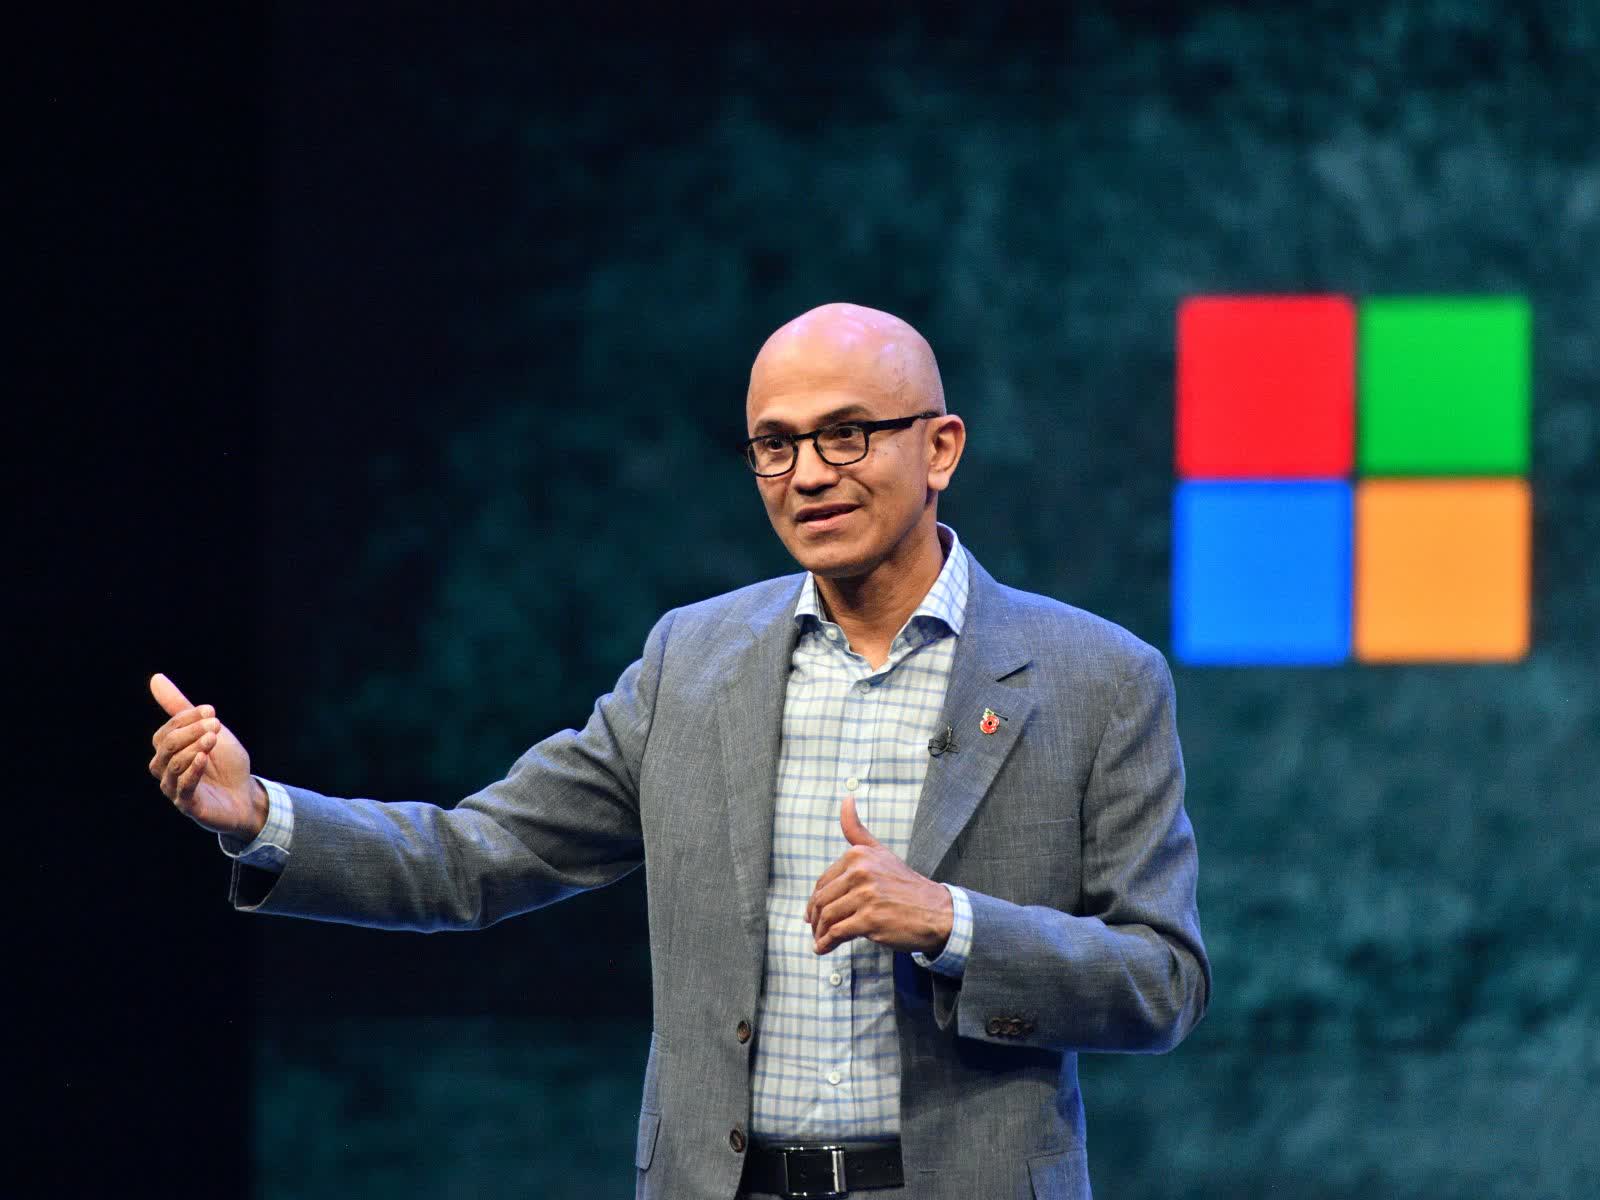 Microsoft CEO admits the Metaverse is actually just games